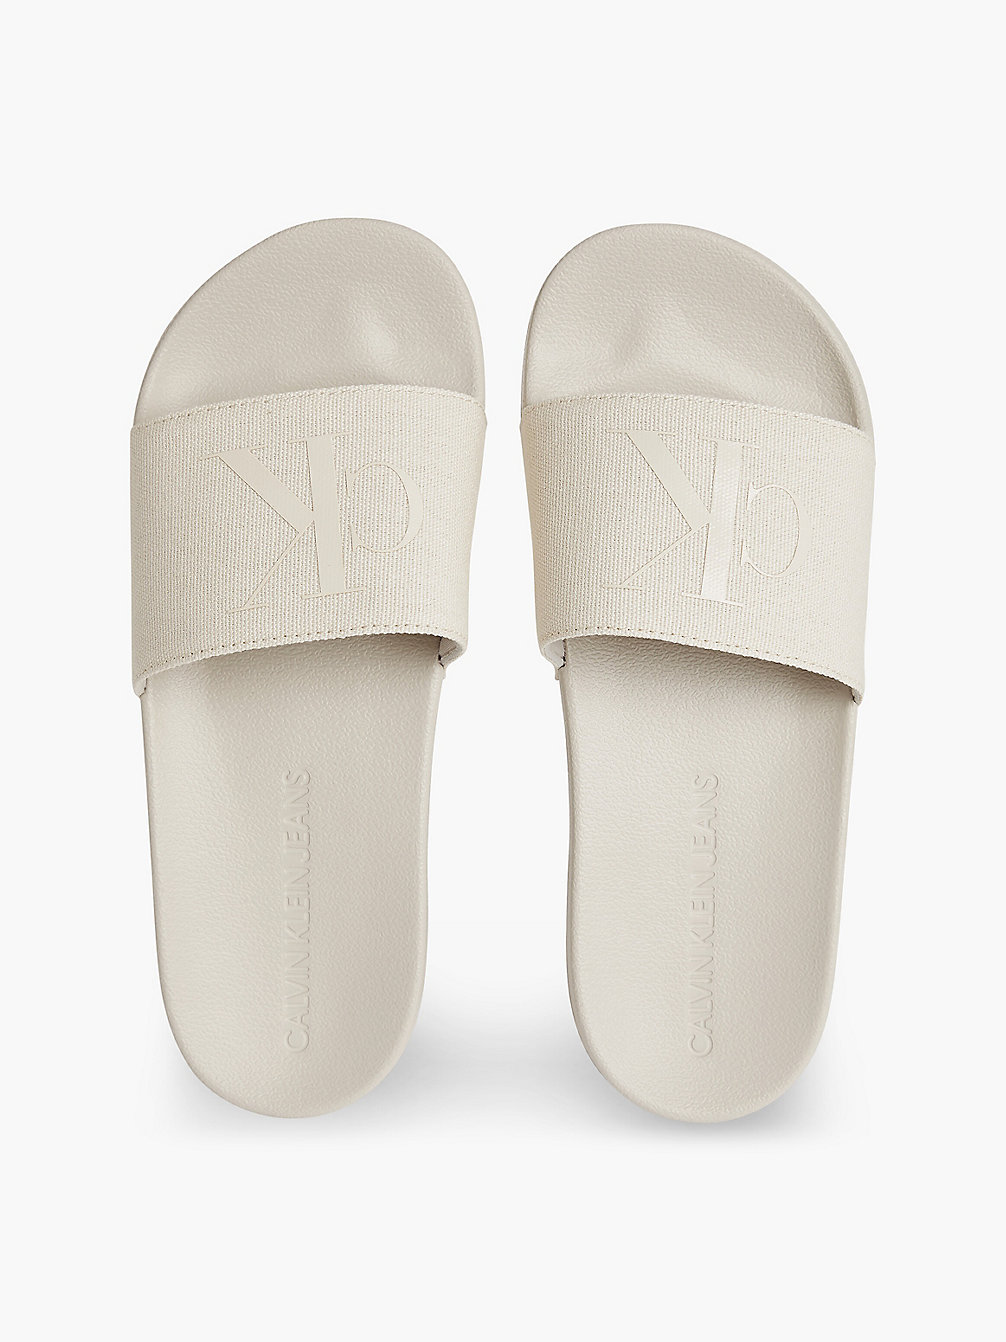 EGGSHELL Recycled Canvas Sliders undefined women Calvin Klein